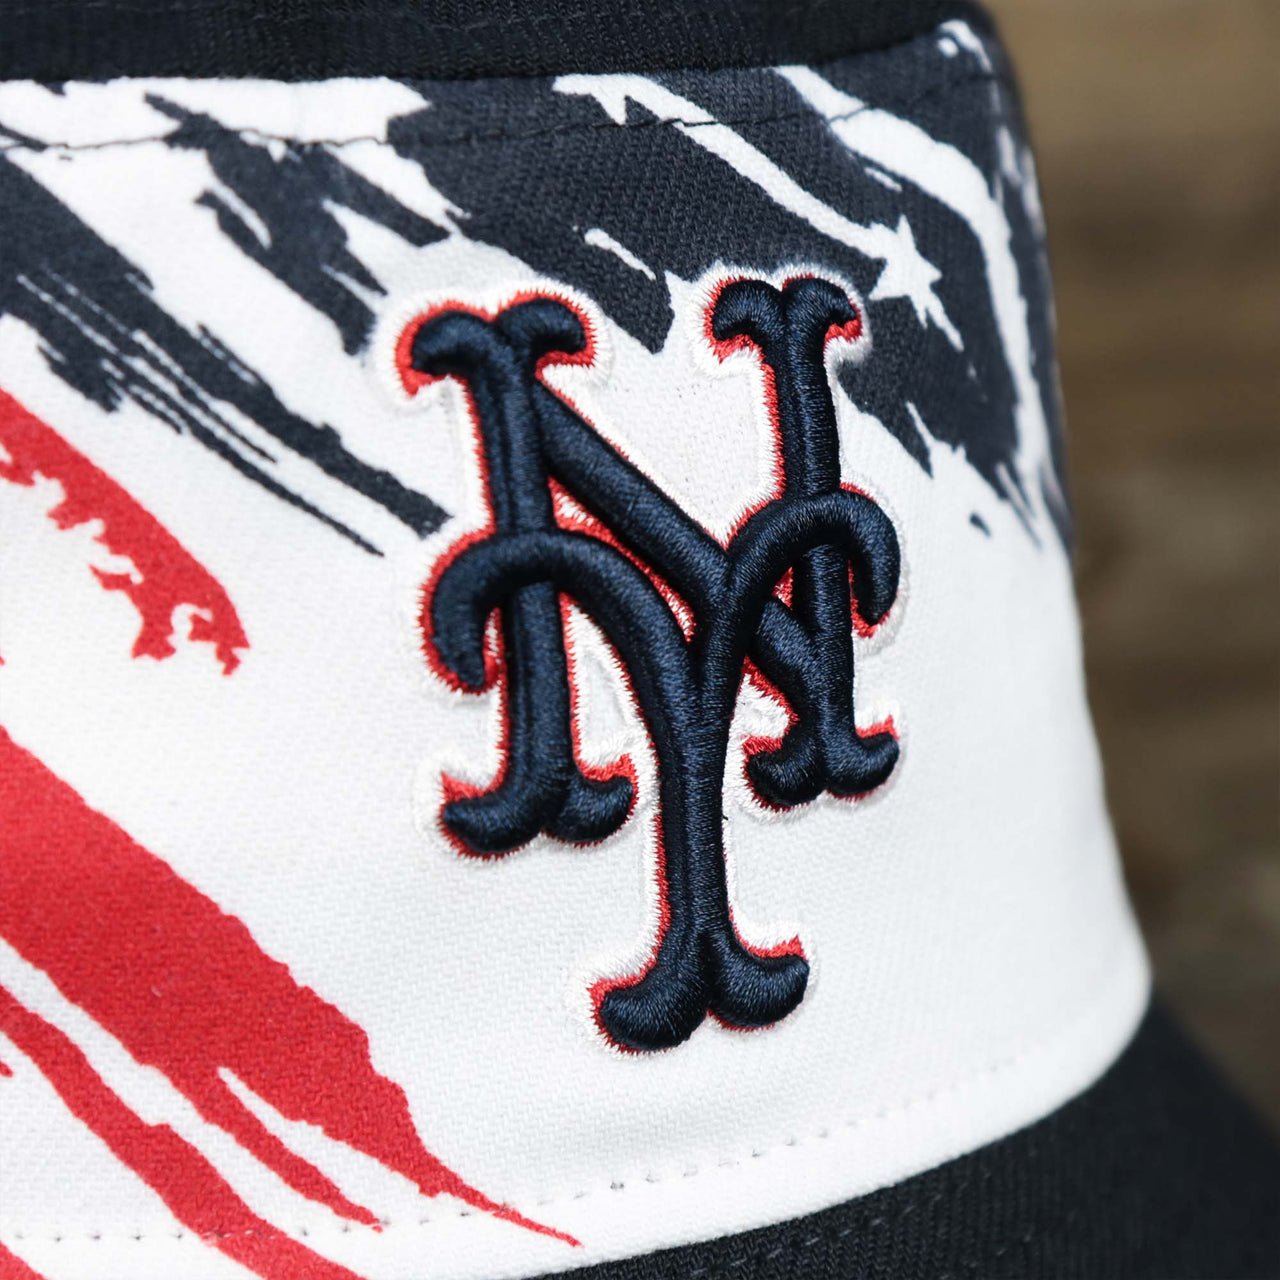 The Mets logo on the Stars And Stripes New York Mets 4th of July Bucket Hat | New Era Navy OSFM